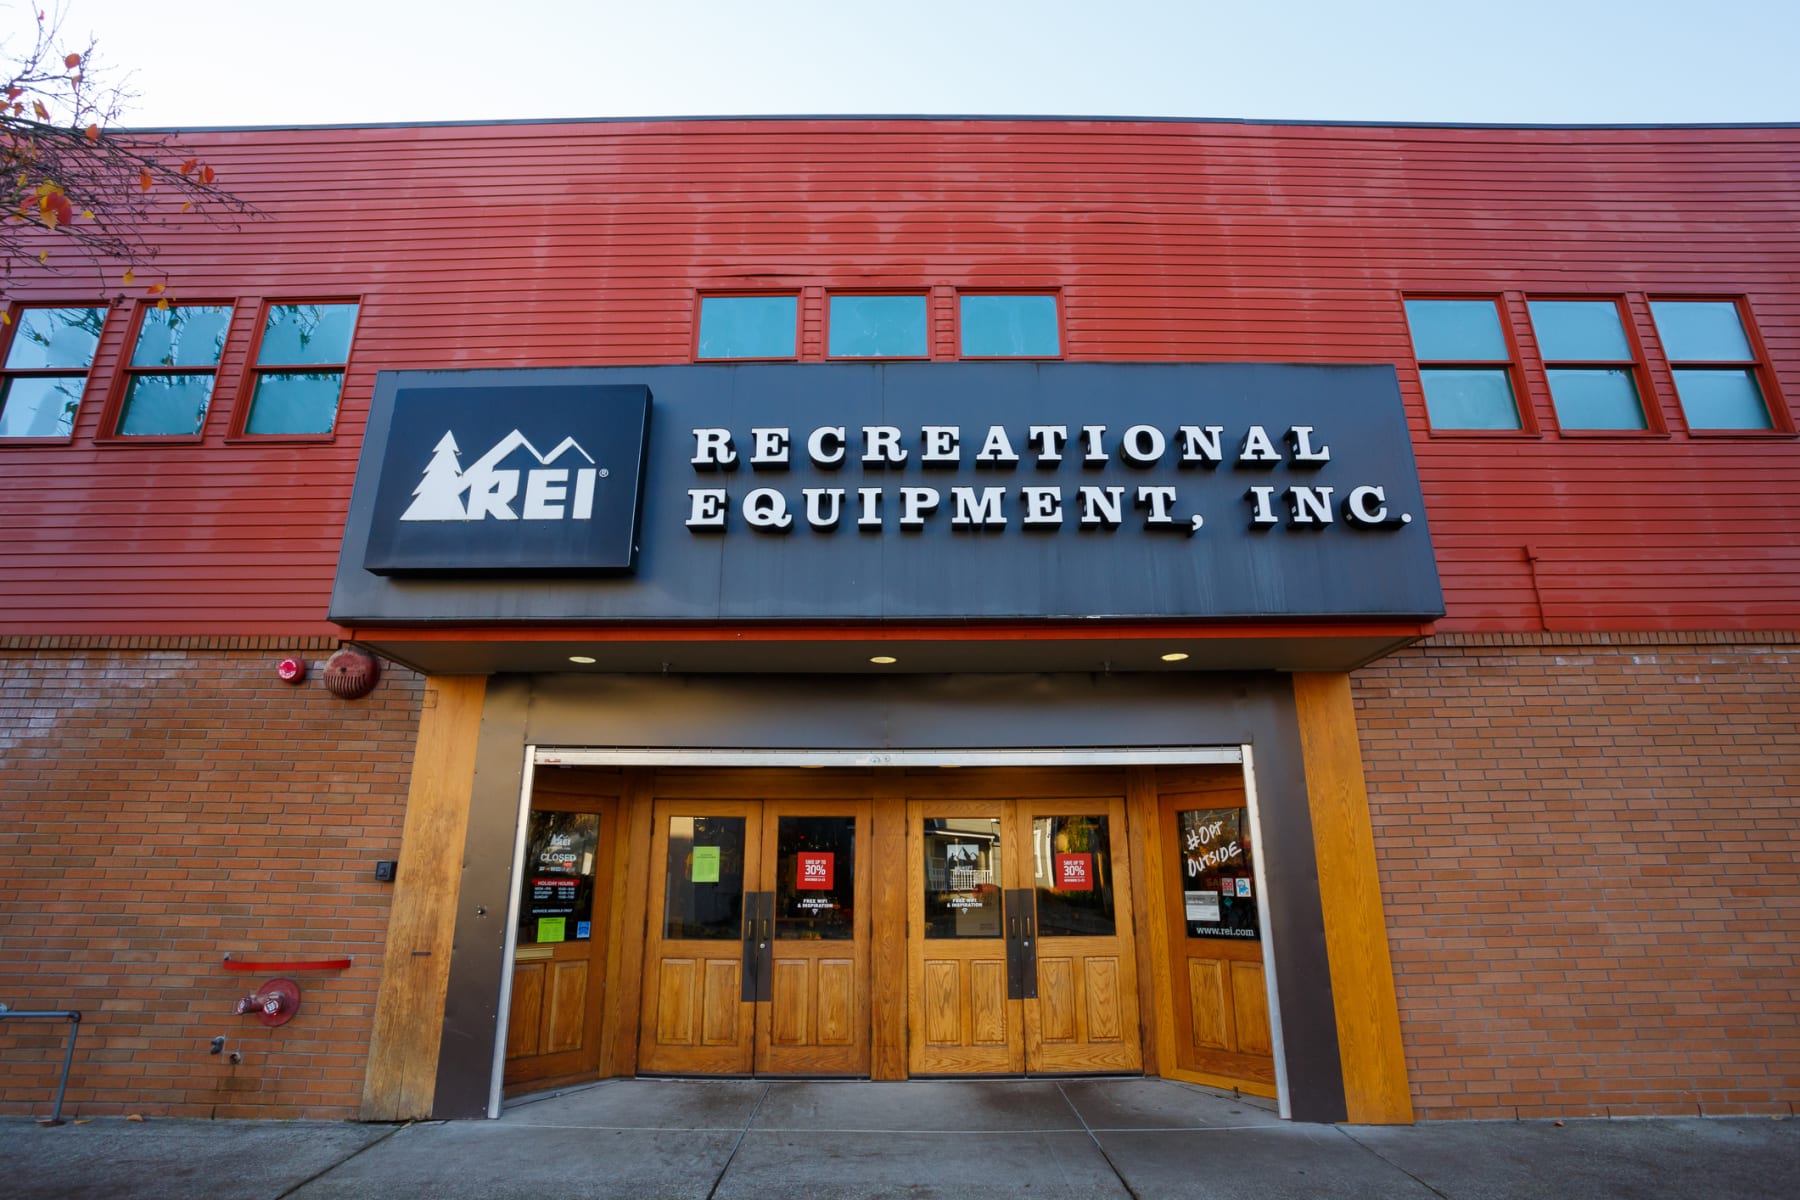 REI's storefront is displayed during the day.